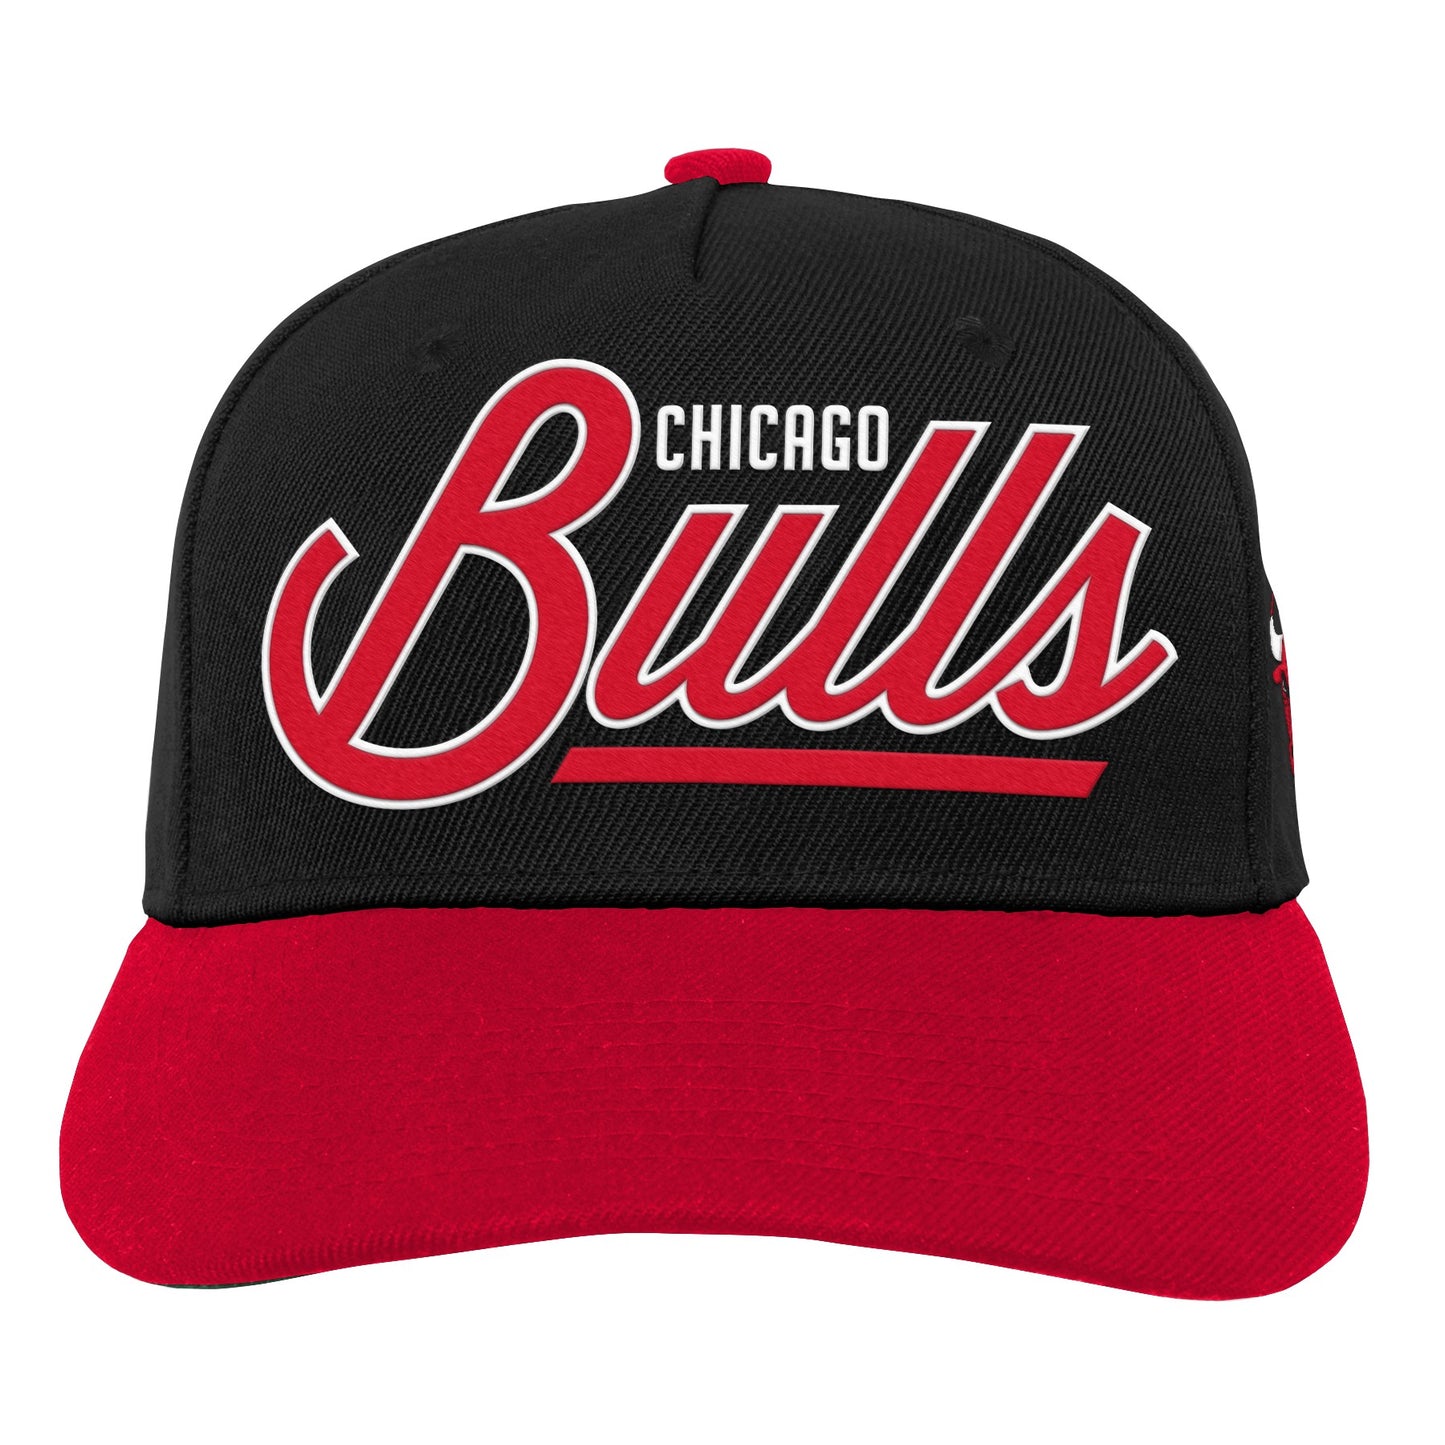 Youth Chicago Bulls NBA Two-Tone Black/Red Retro Script Adjustable Hat